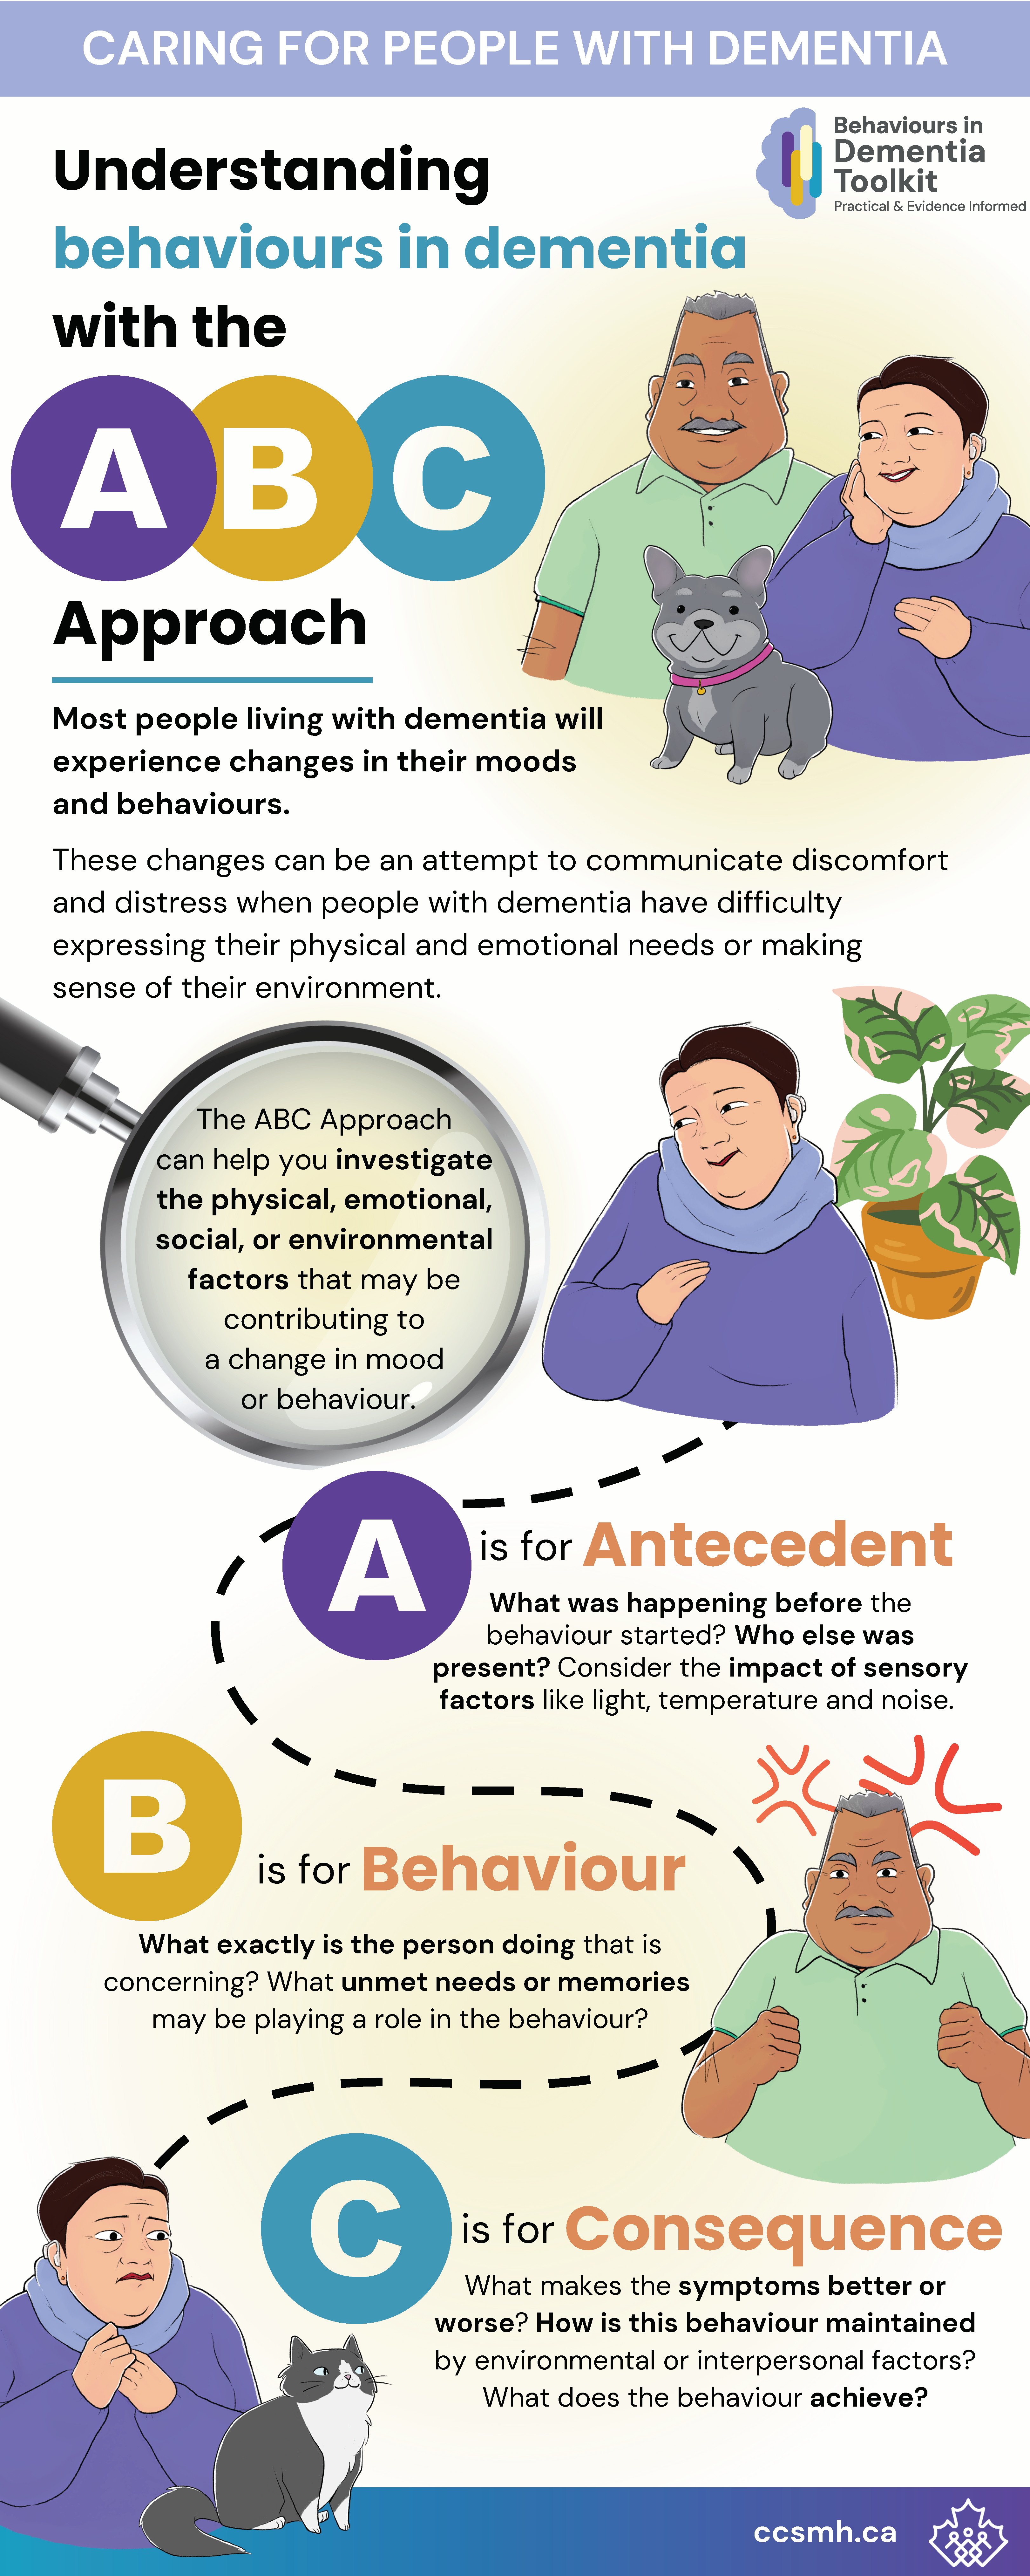 Abc APPROACH INFOGRAPHIC